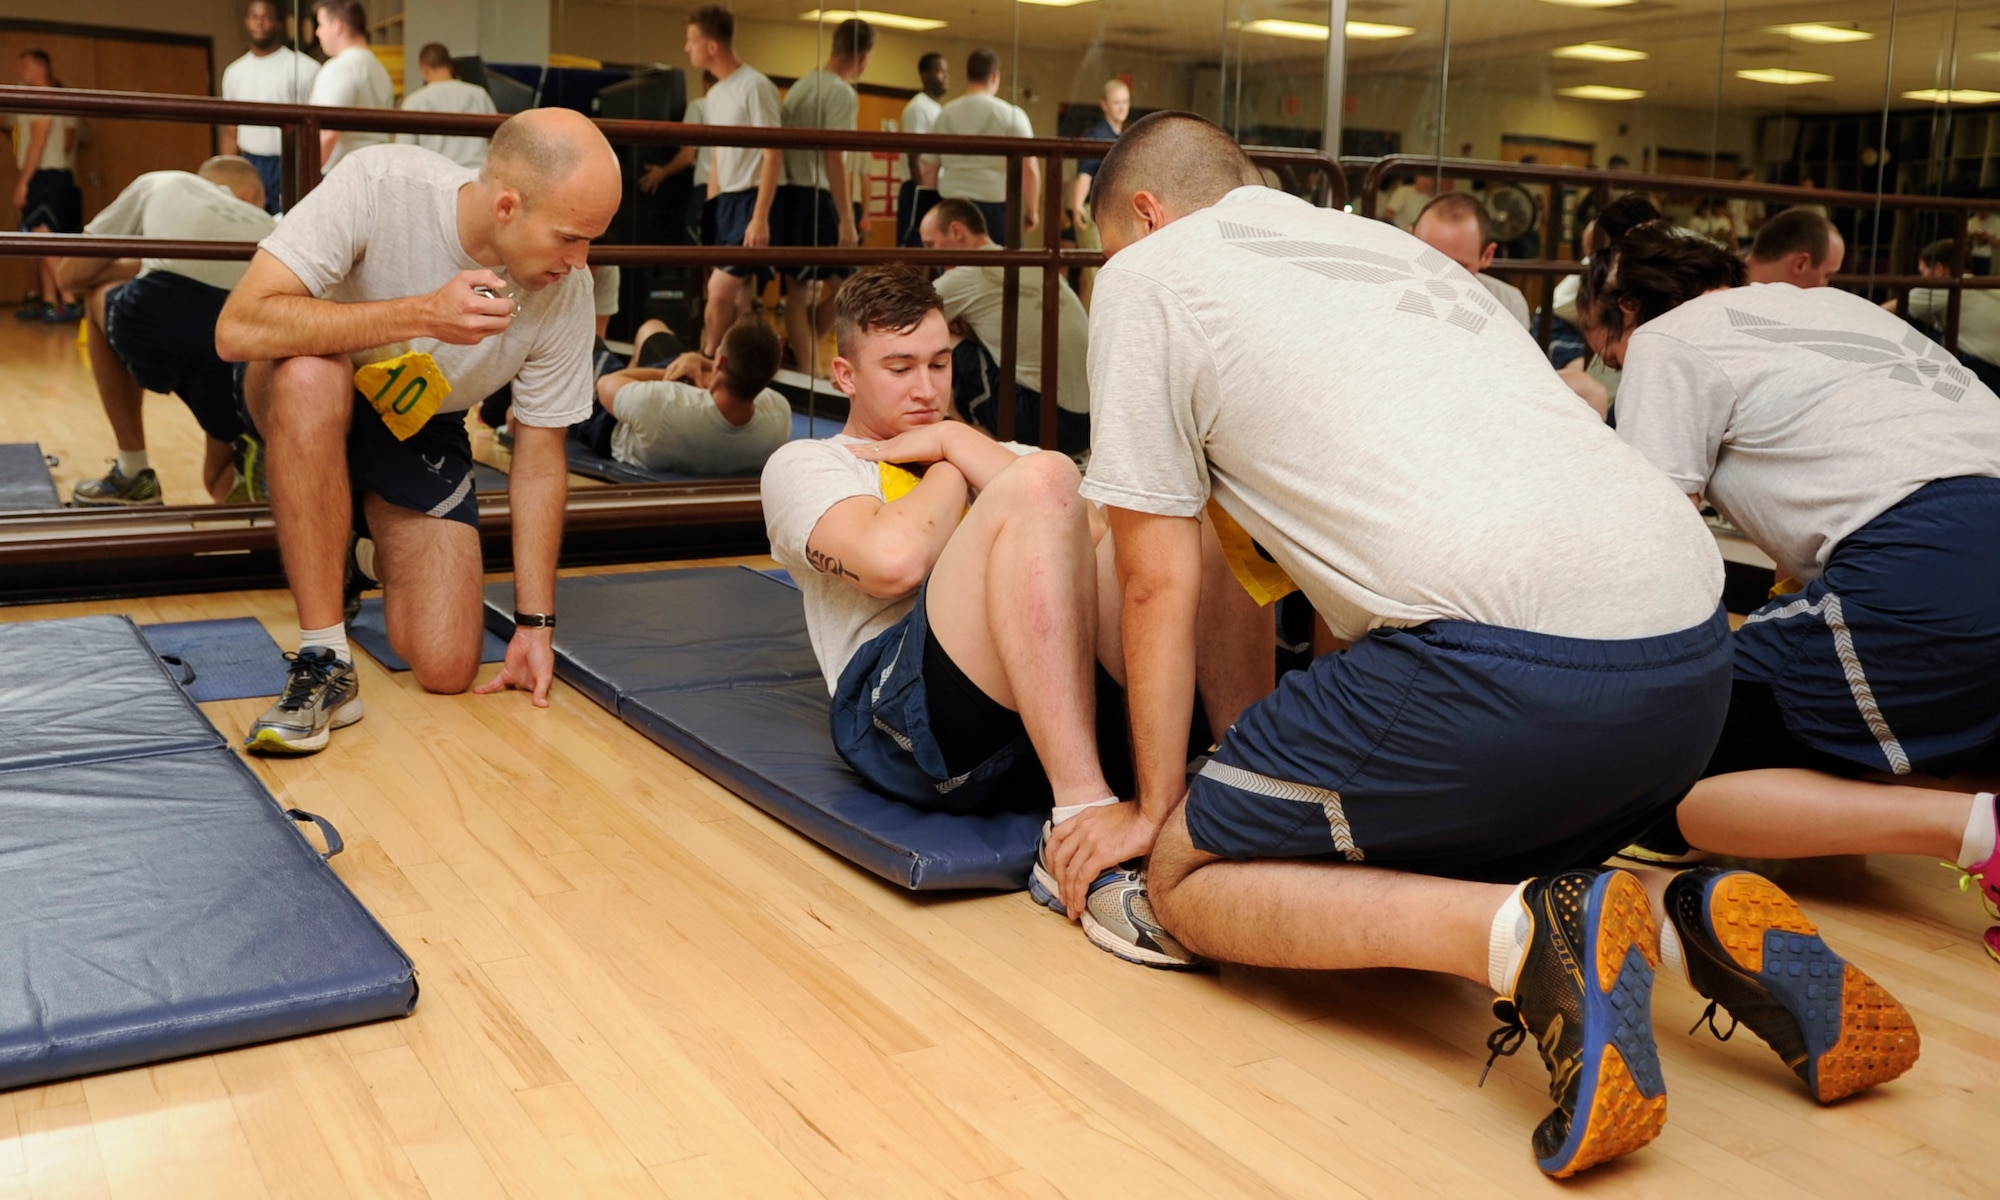 U.S. Air Force Airmen execute the timed sit up portion of the Air Force fitness assessment at Davis-Monthan Air Force Base, Ariz., July 27, 2015. The FA consists of a body composition assessment, to include height and weight measurements and waist circumference measurements, timed pushups and sit ups and a 1.5 mile run. (U.S. Air Force photo by Airman 1st Class Mya M. Crosby/Released)